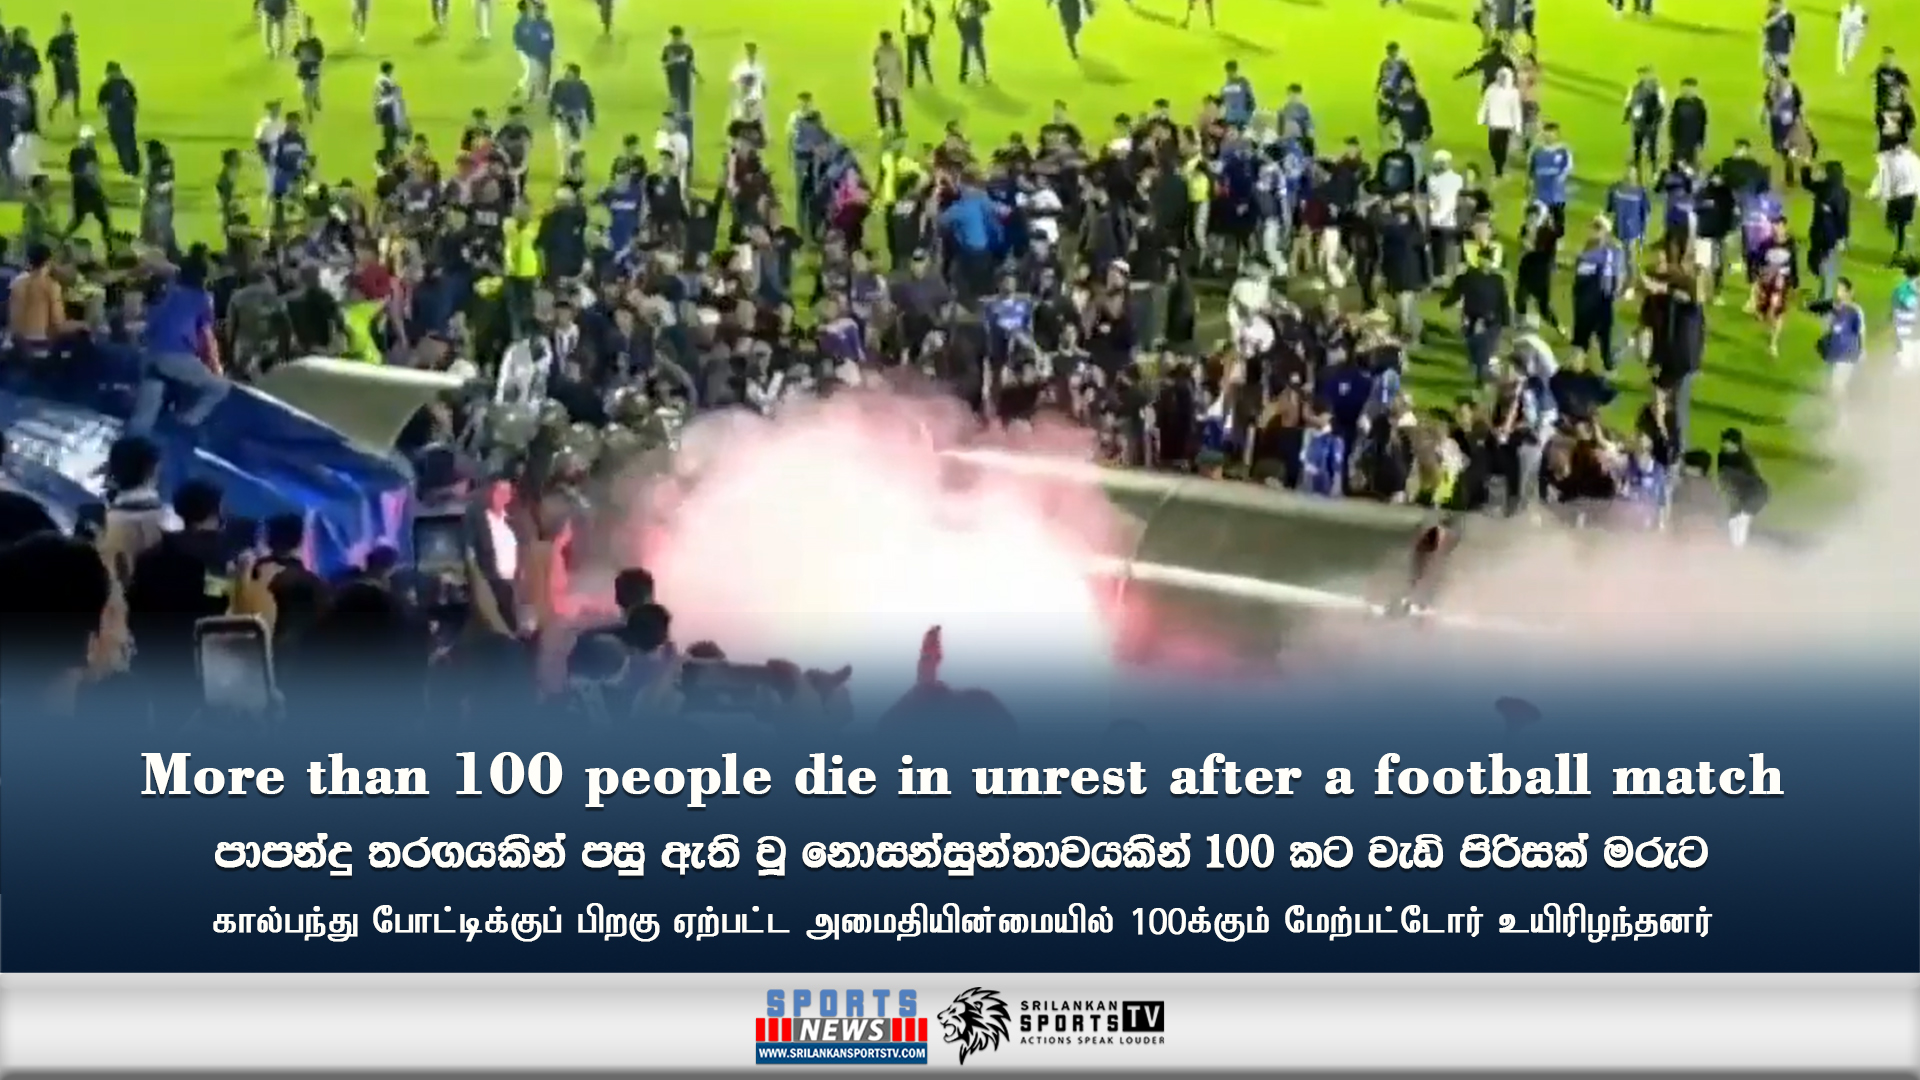 More than 100 people die in unrest after a football match